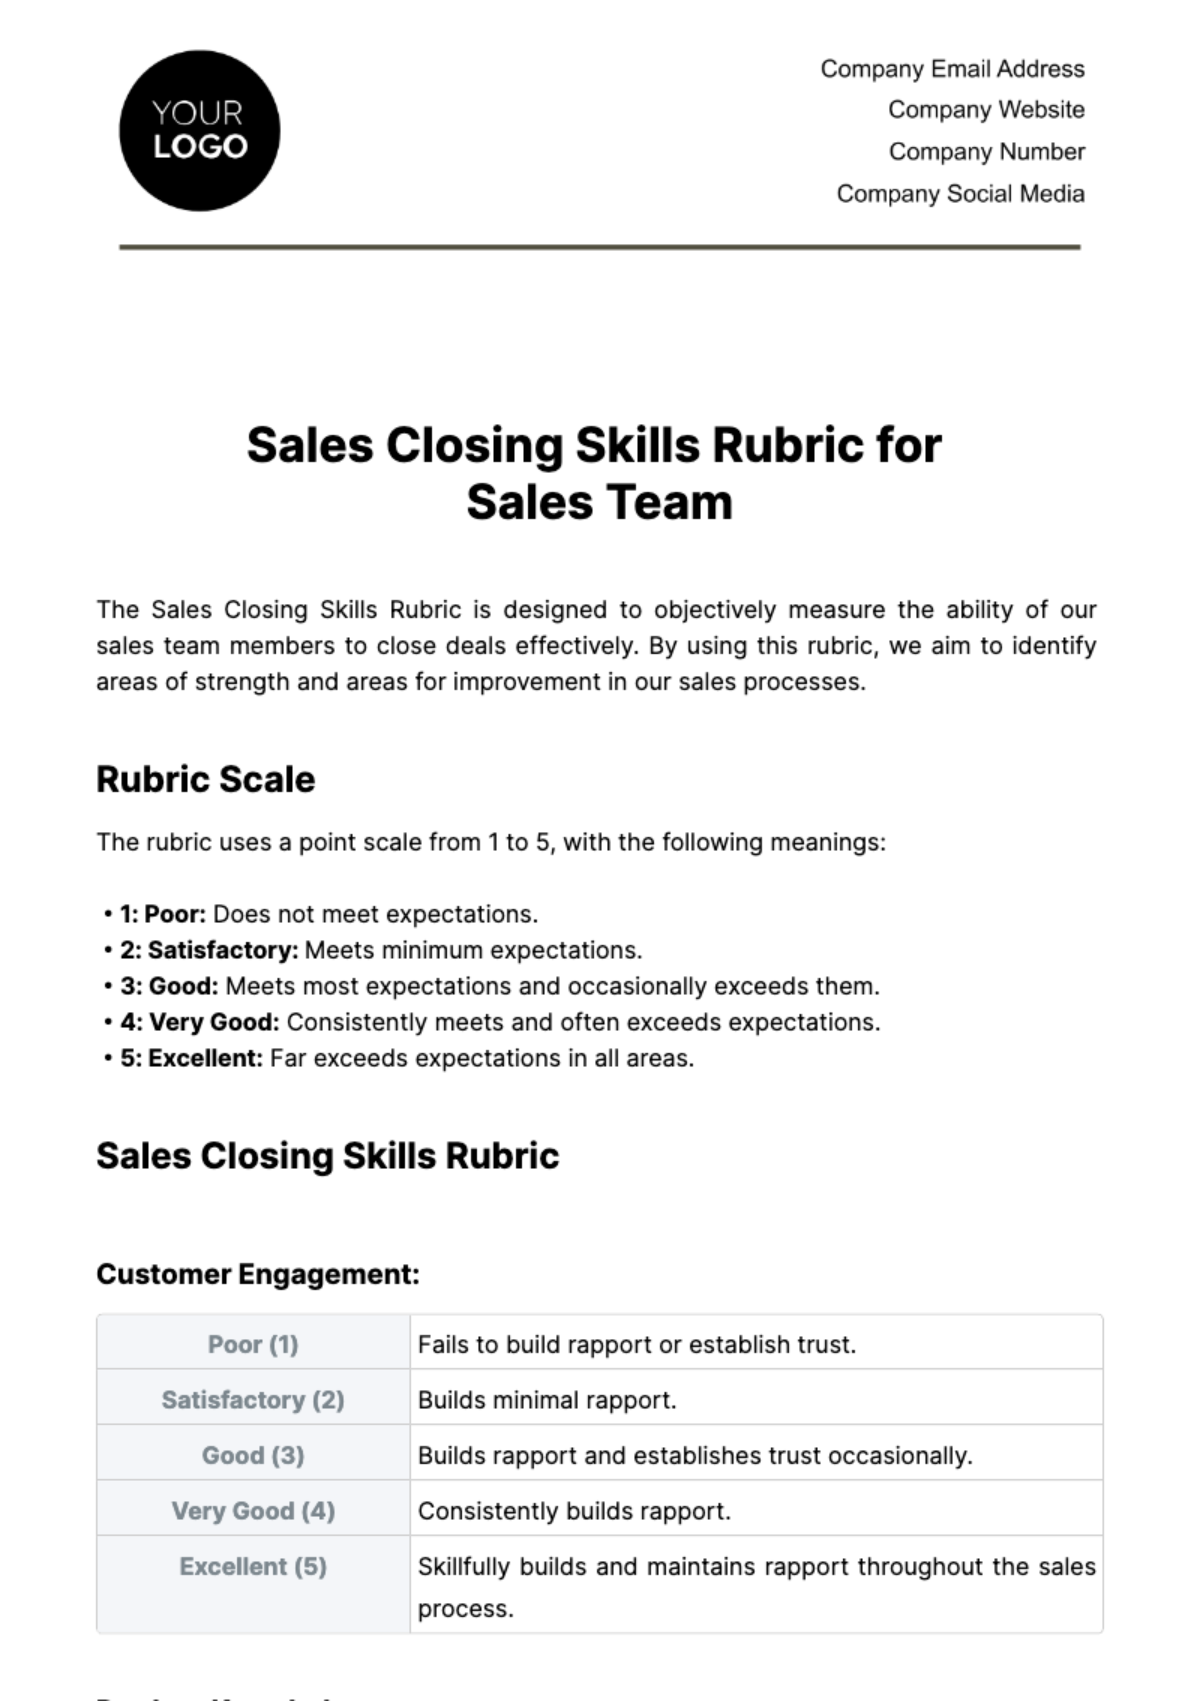 Free Sales Closing Skills Rubric for Sales Team Template